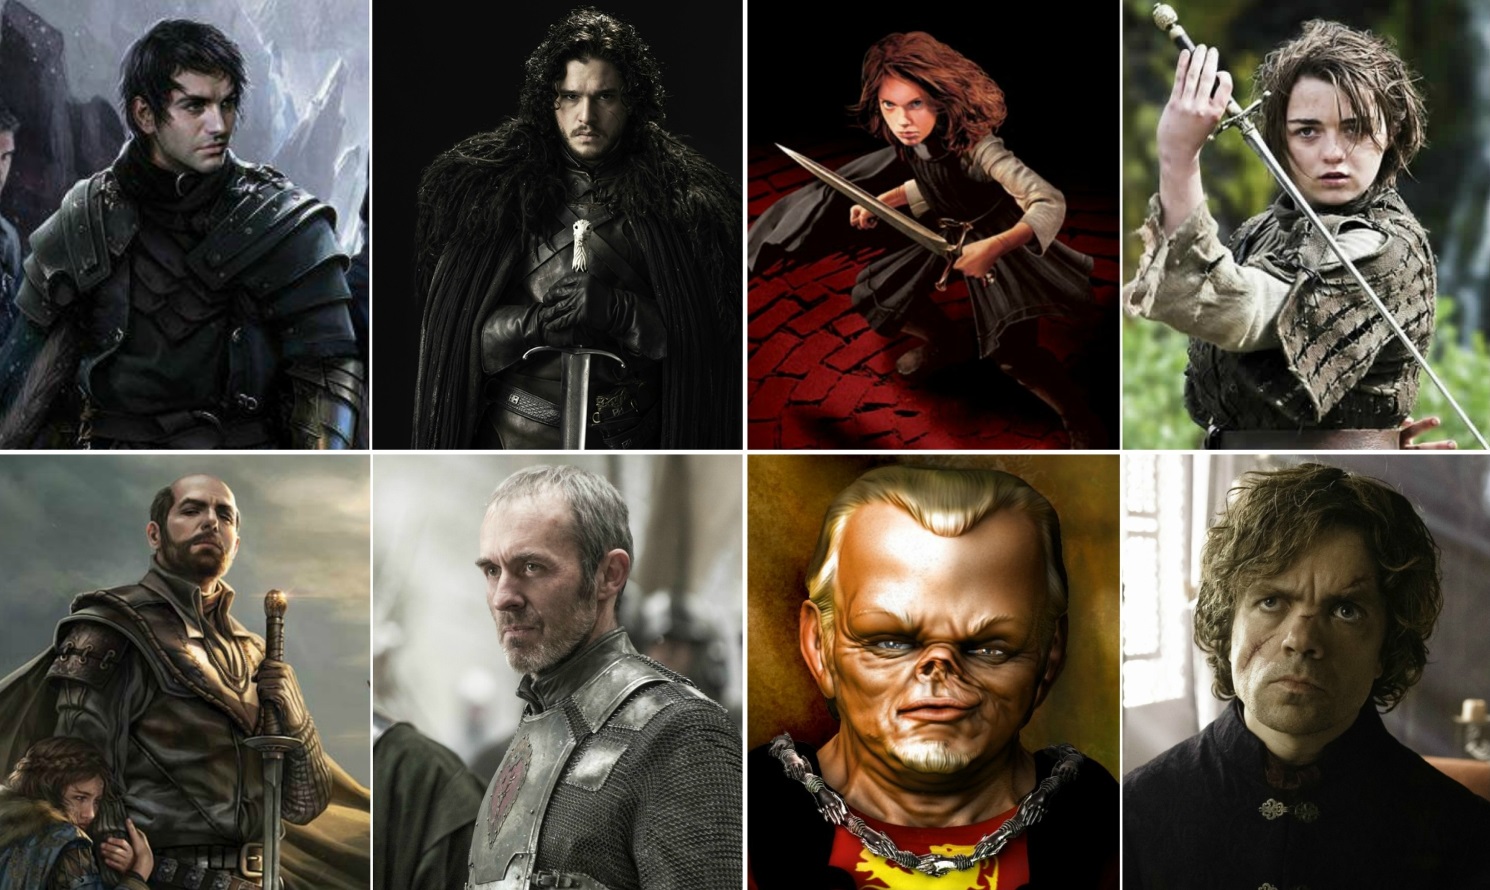 Season 3 cast  Game of thrones funny, Game of throne actors, A song of ice  and fire